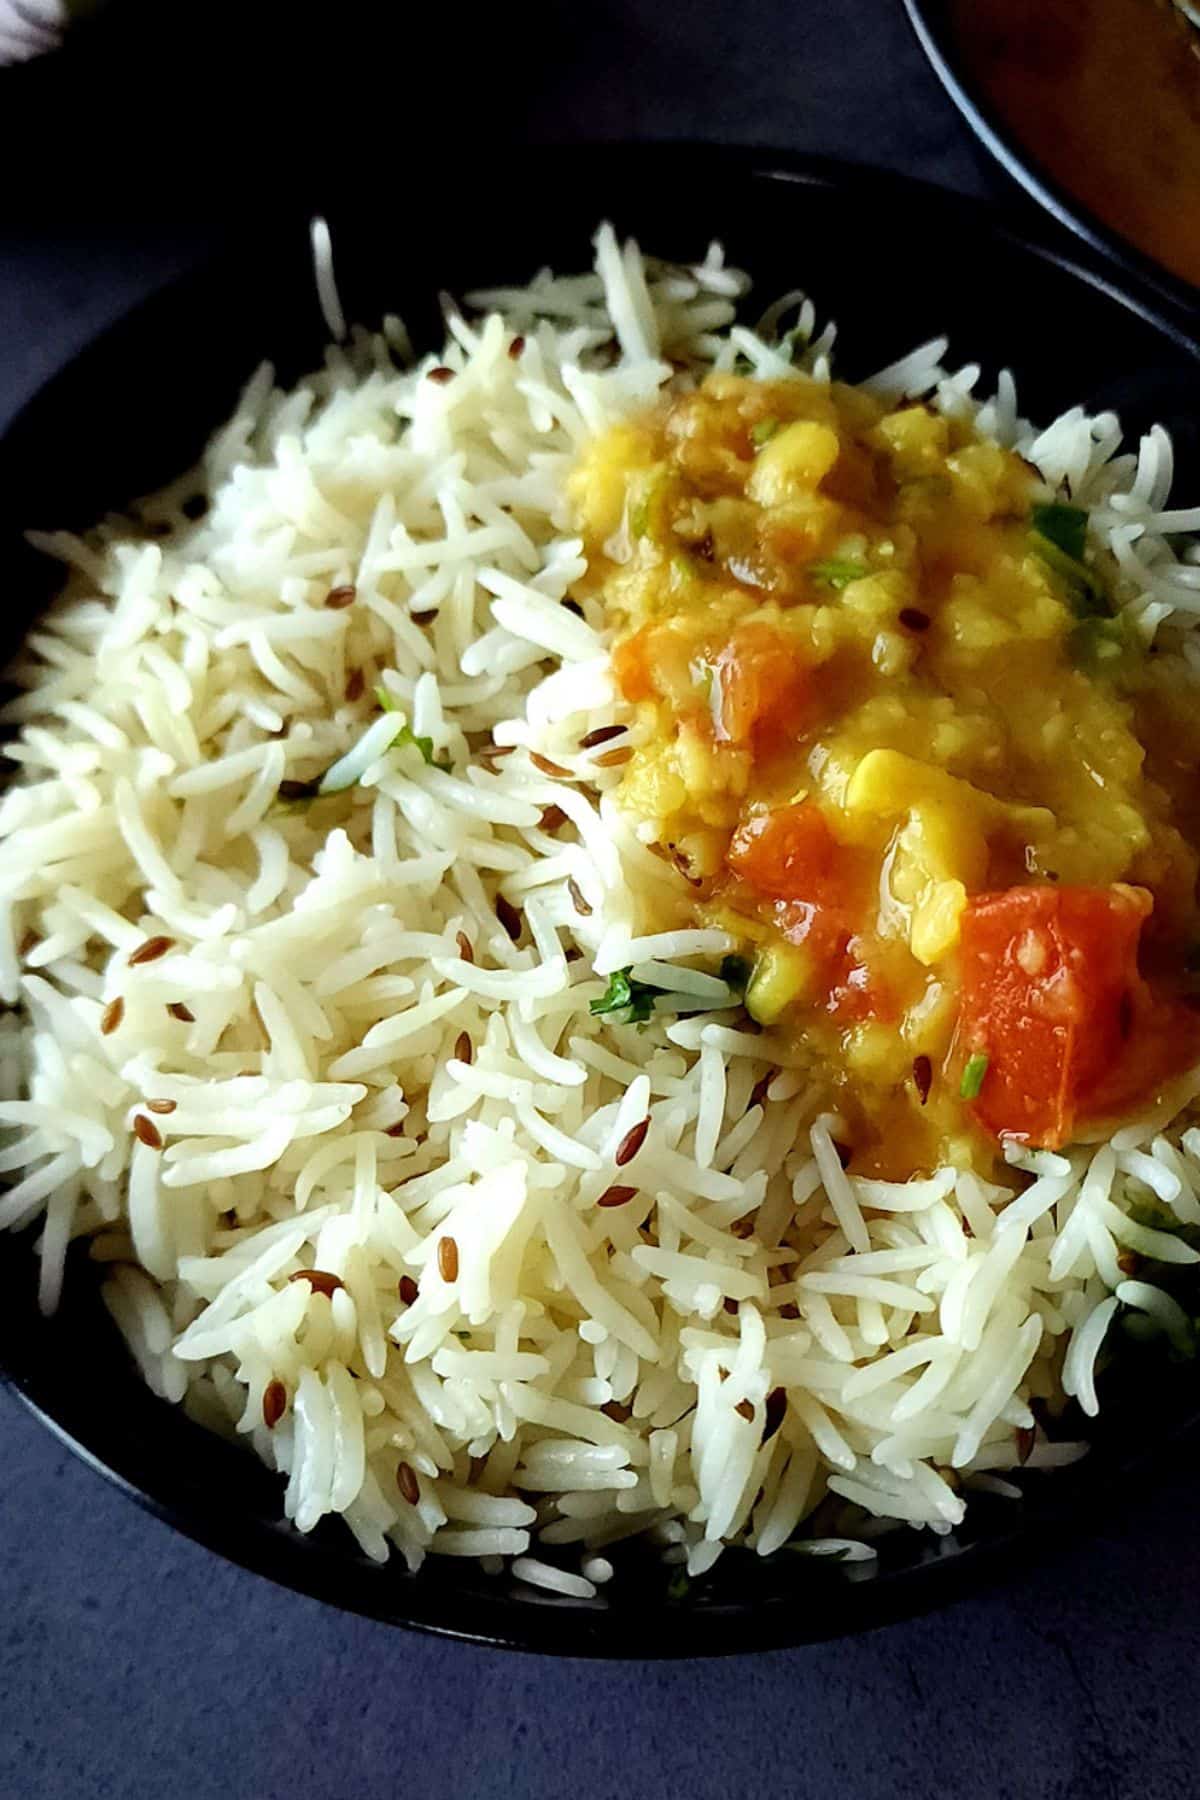 Jeera rice and dal served in a black bowl.